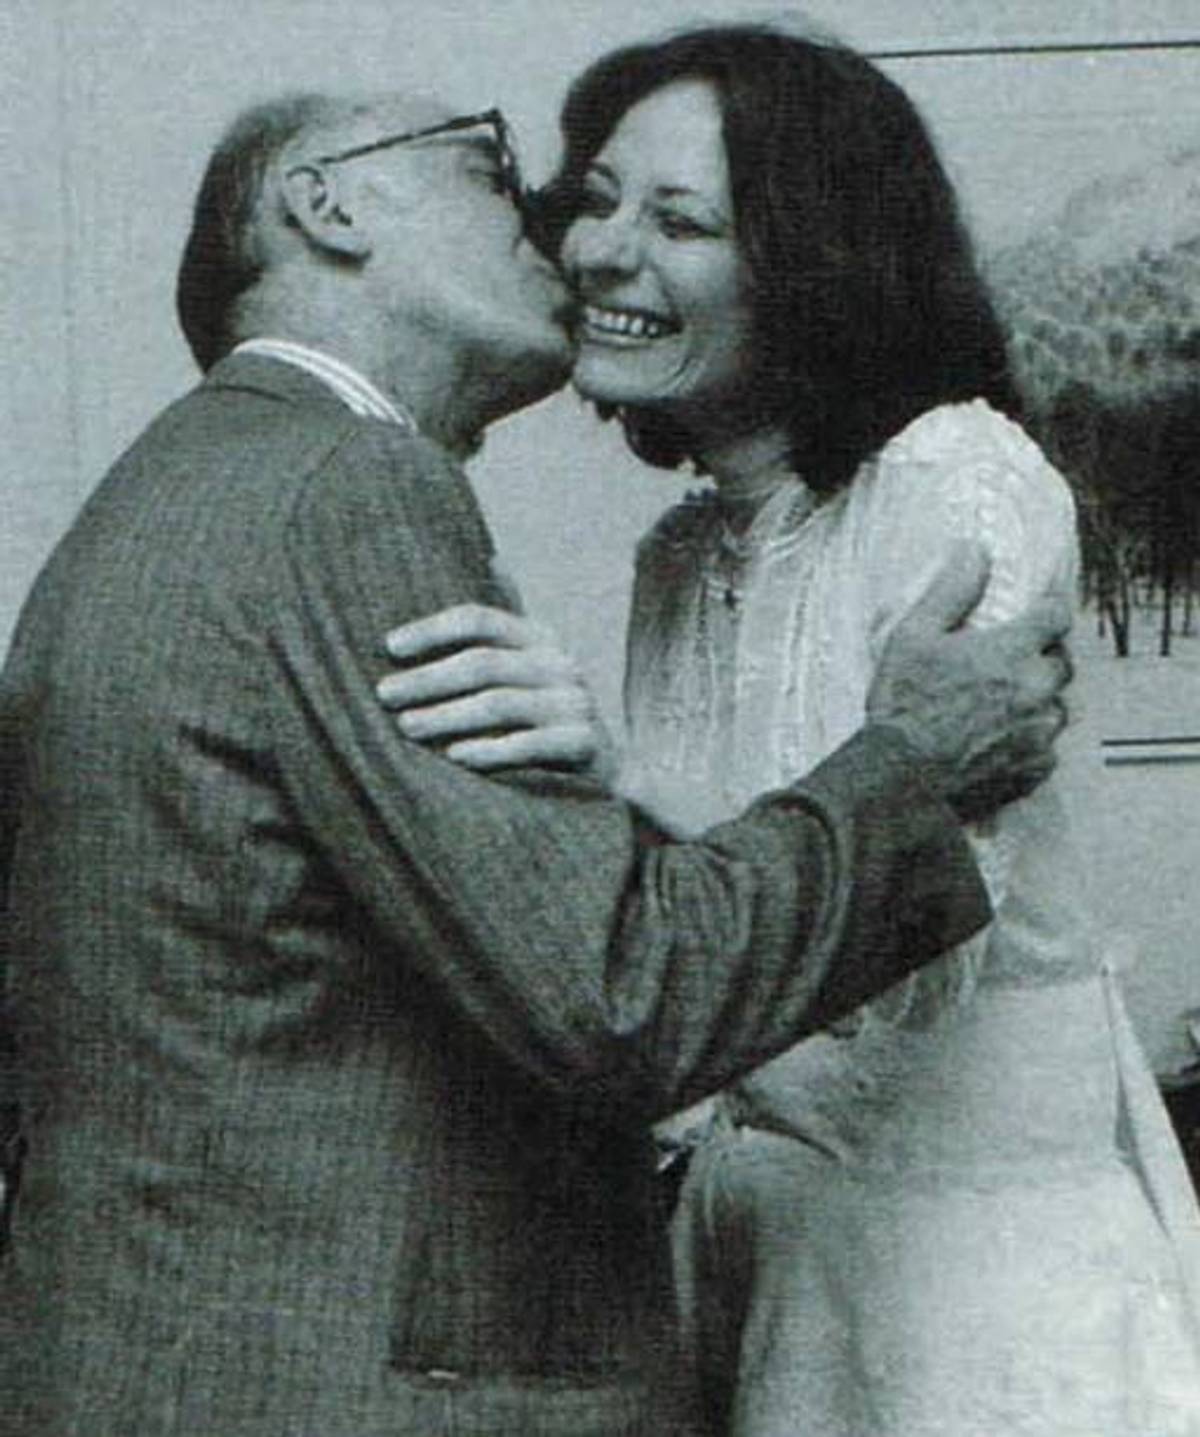 Arlene with Bern at her first wedding, in 1979 to Shepard Kantor